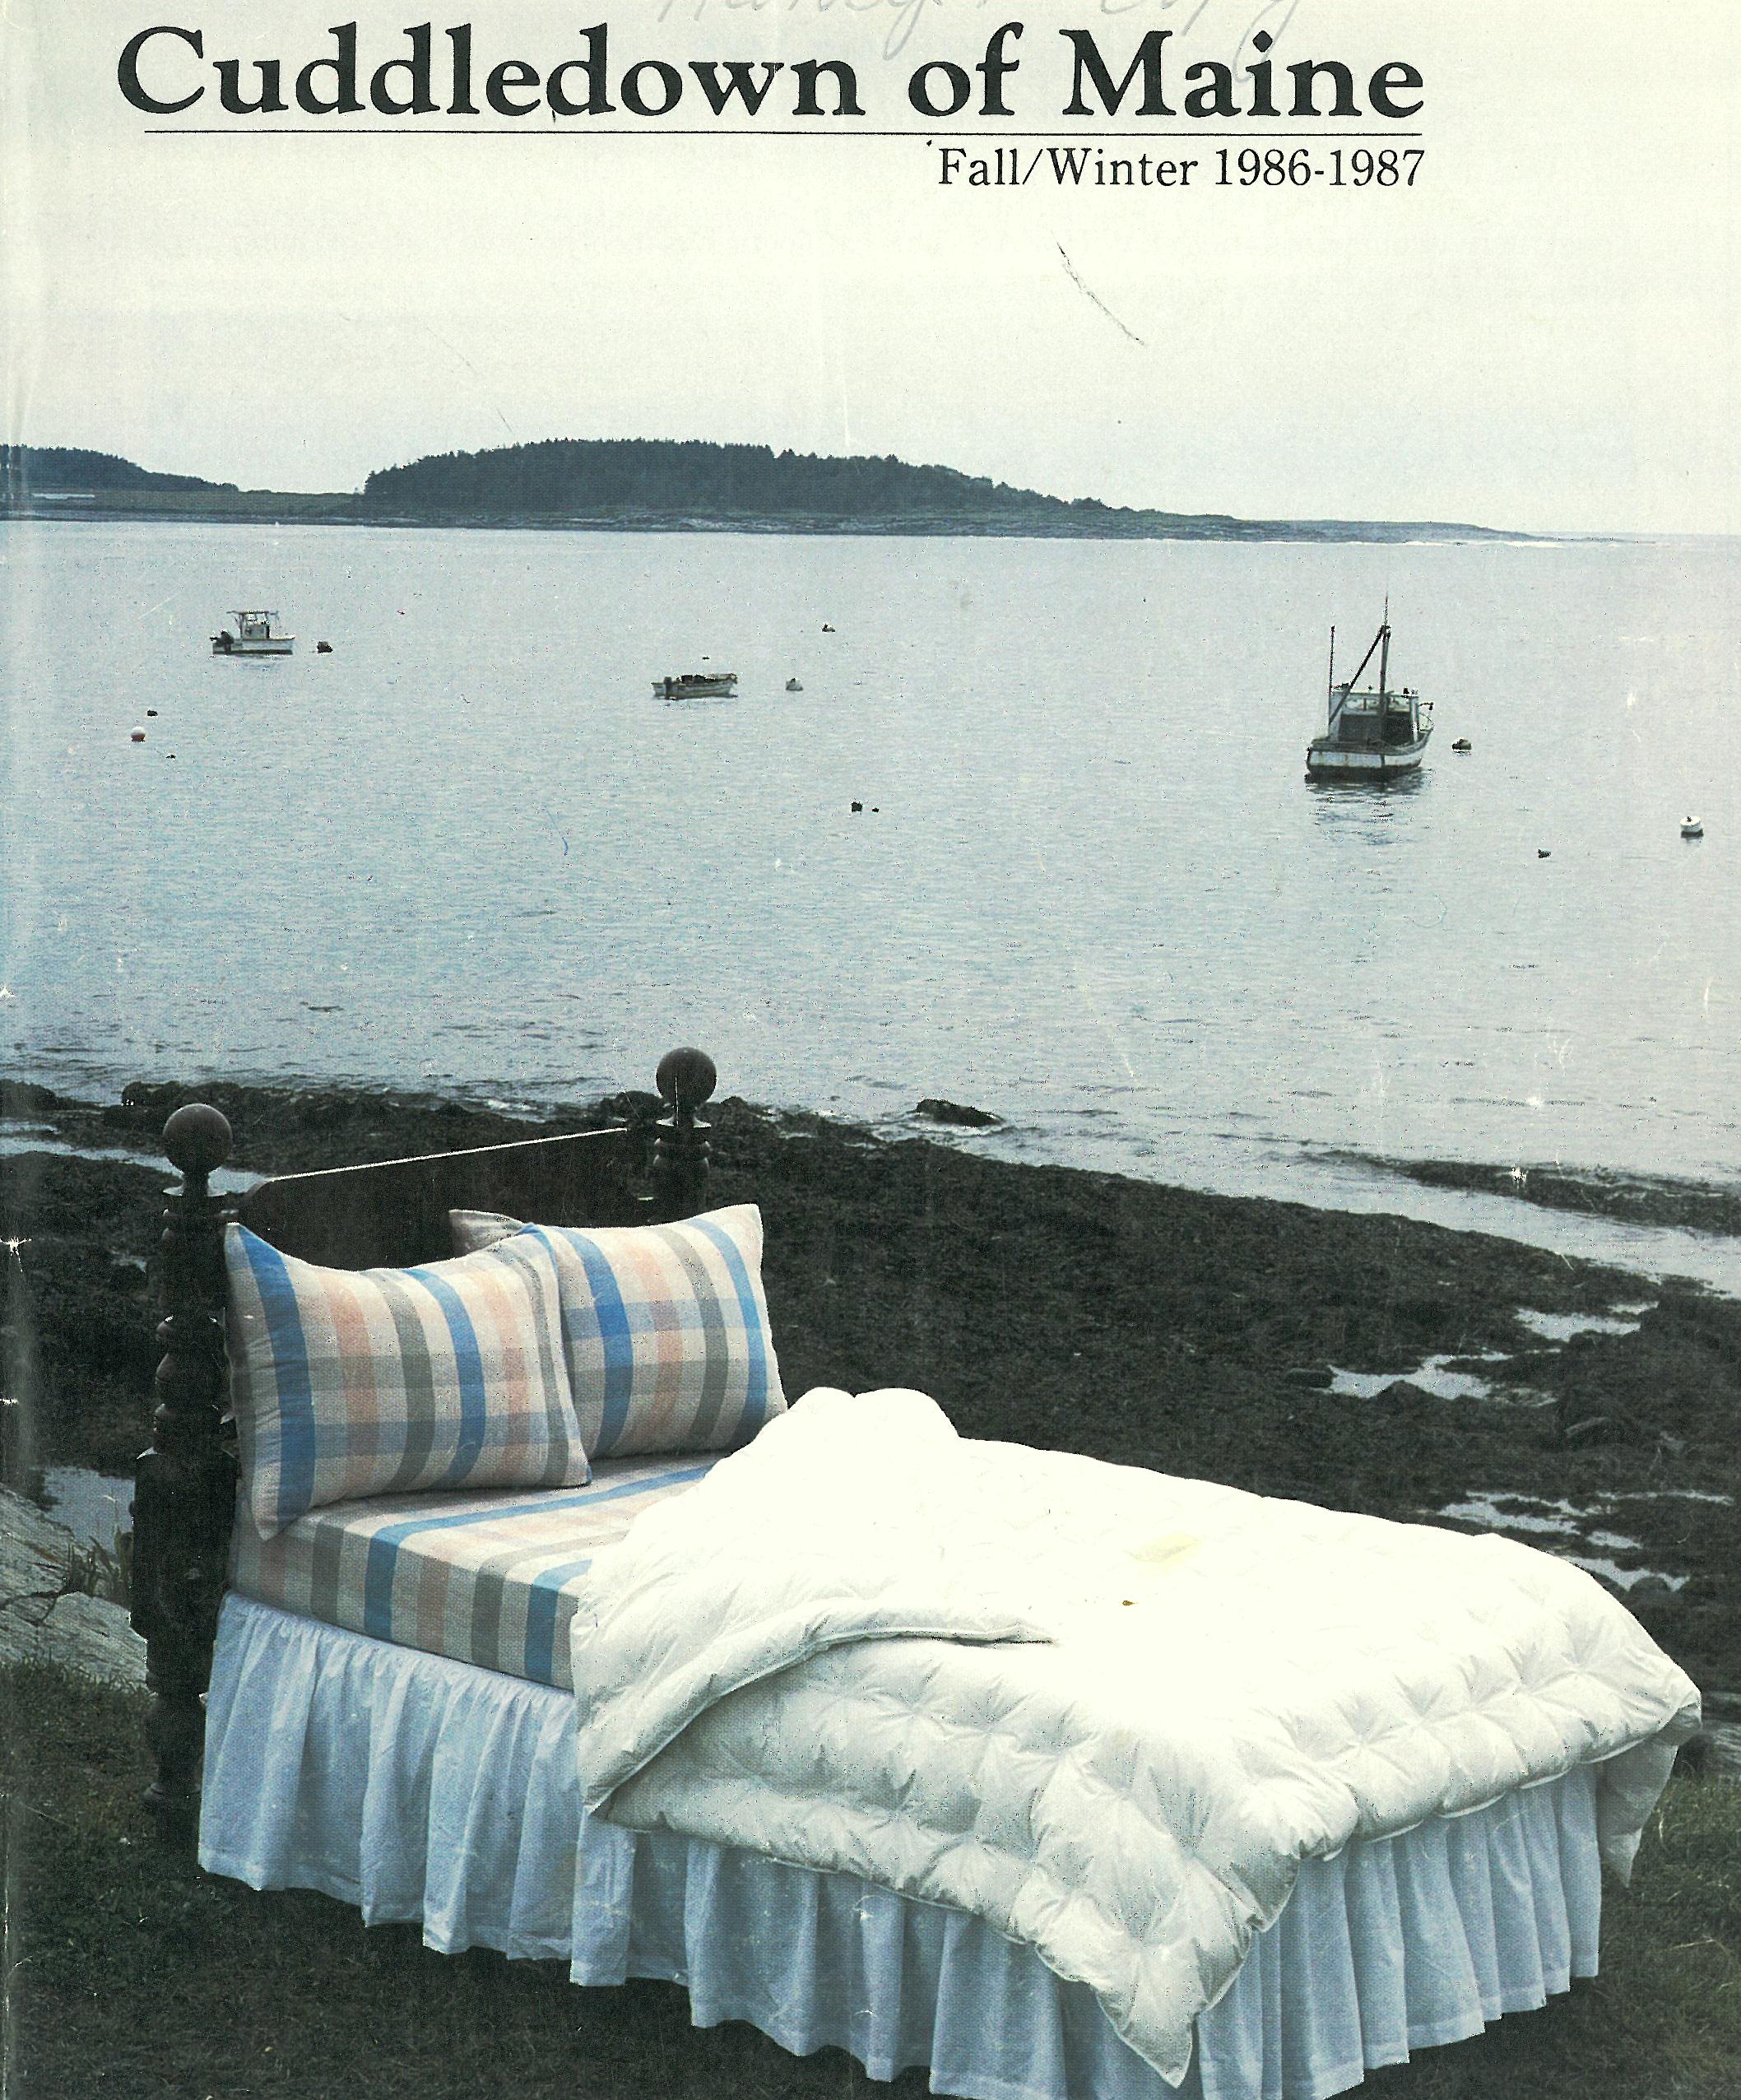 Bed at low tide_Cuddledown catalog '86-87